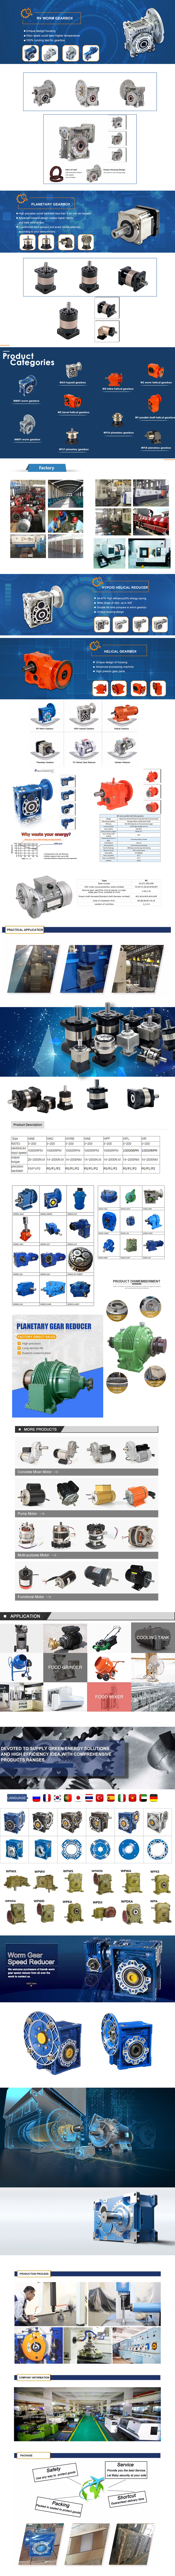   in Bukavu Democratic Republic of the Congo  sales   price   shop   near me   near me shop   factory   supplier High Efficiency Sgr Internal Splined Shaft Planetary Gear Speed Reducer, Gearmotor, Gearbox with Foot manufacturer   best   Cost   Custom   Cheap   wholesaler 